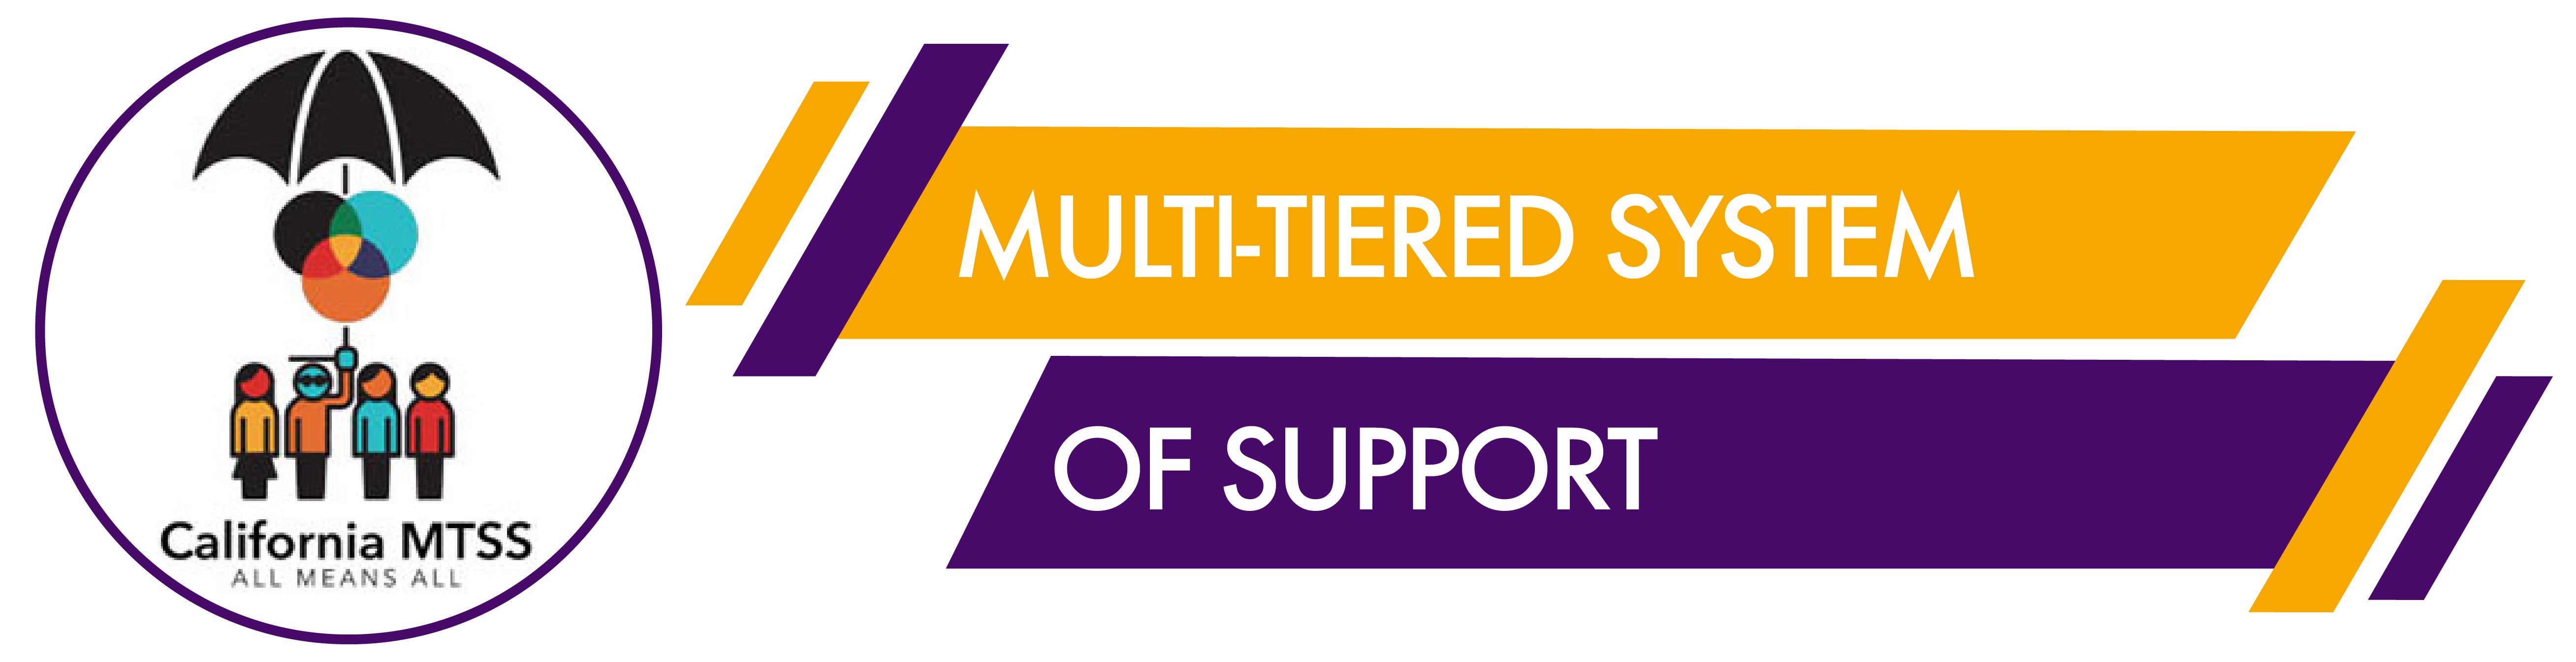 Multi-Tiered System of Support Banner